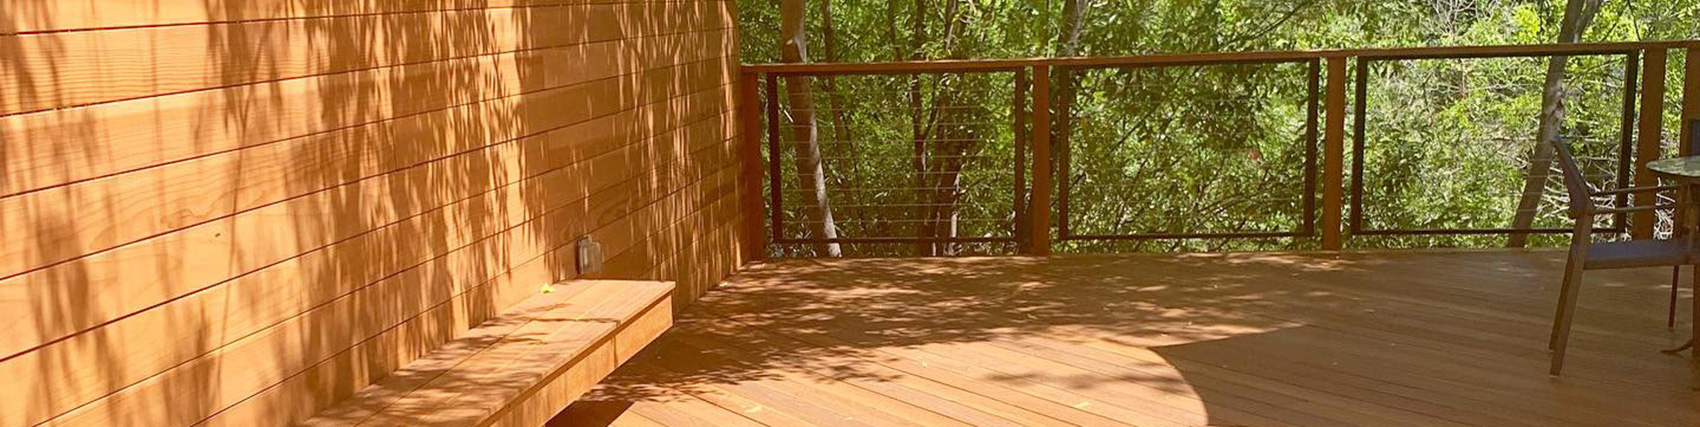 sunny and warm wooden deck